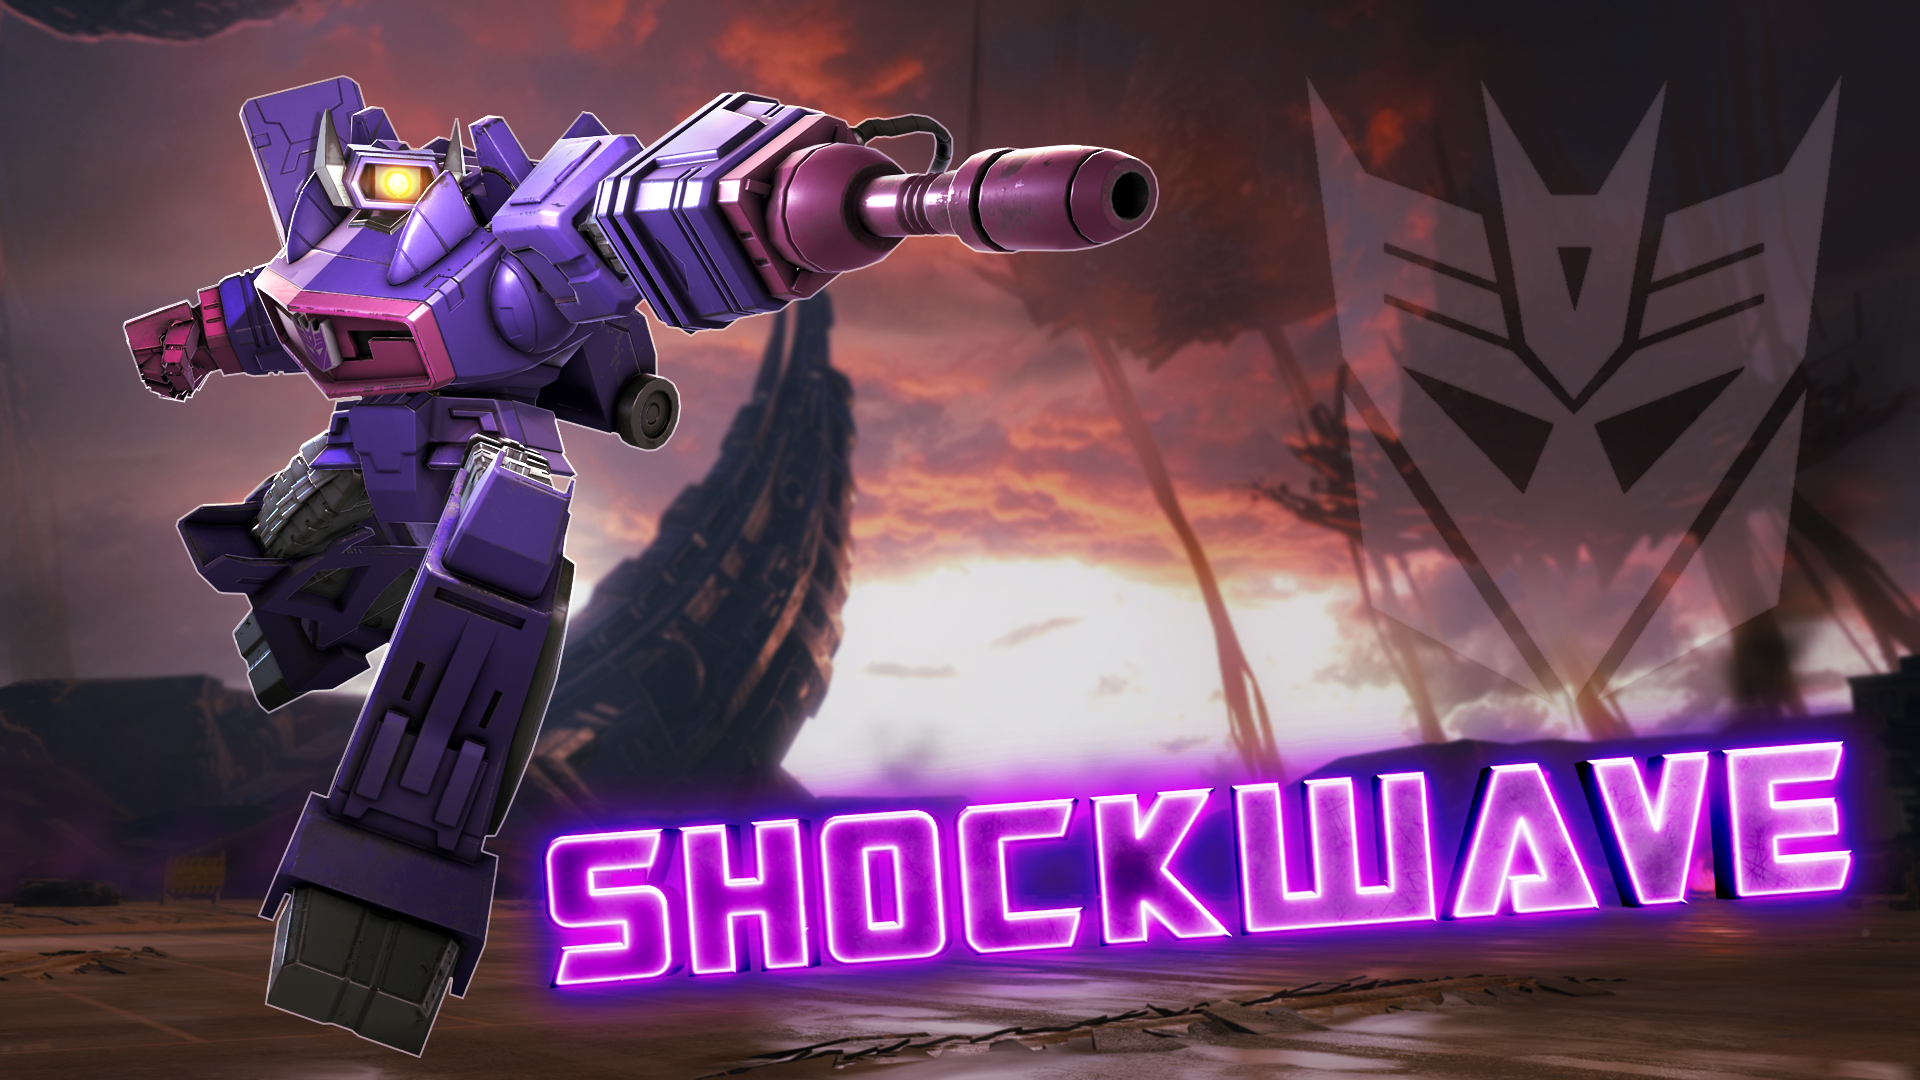 Transformers News: Shockwave joins Kabam's "Transformers: Forged To Fight" Mobile Fighting Game